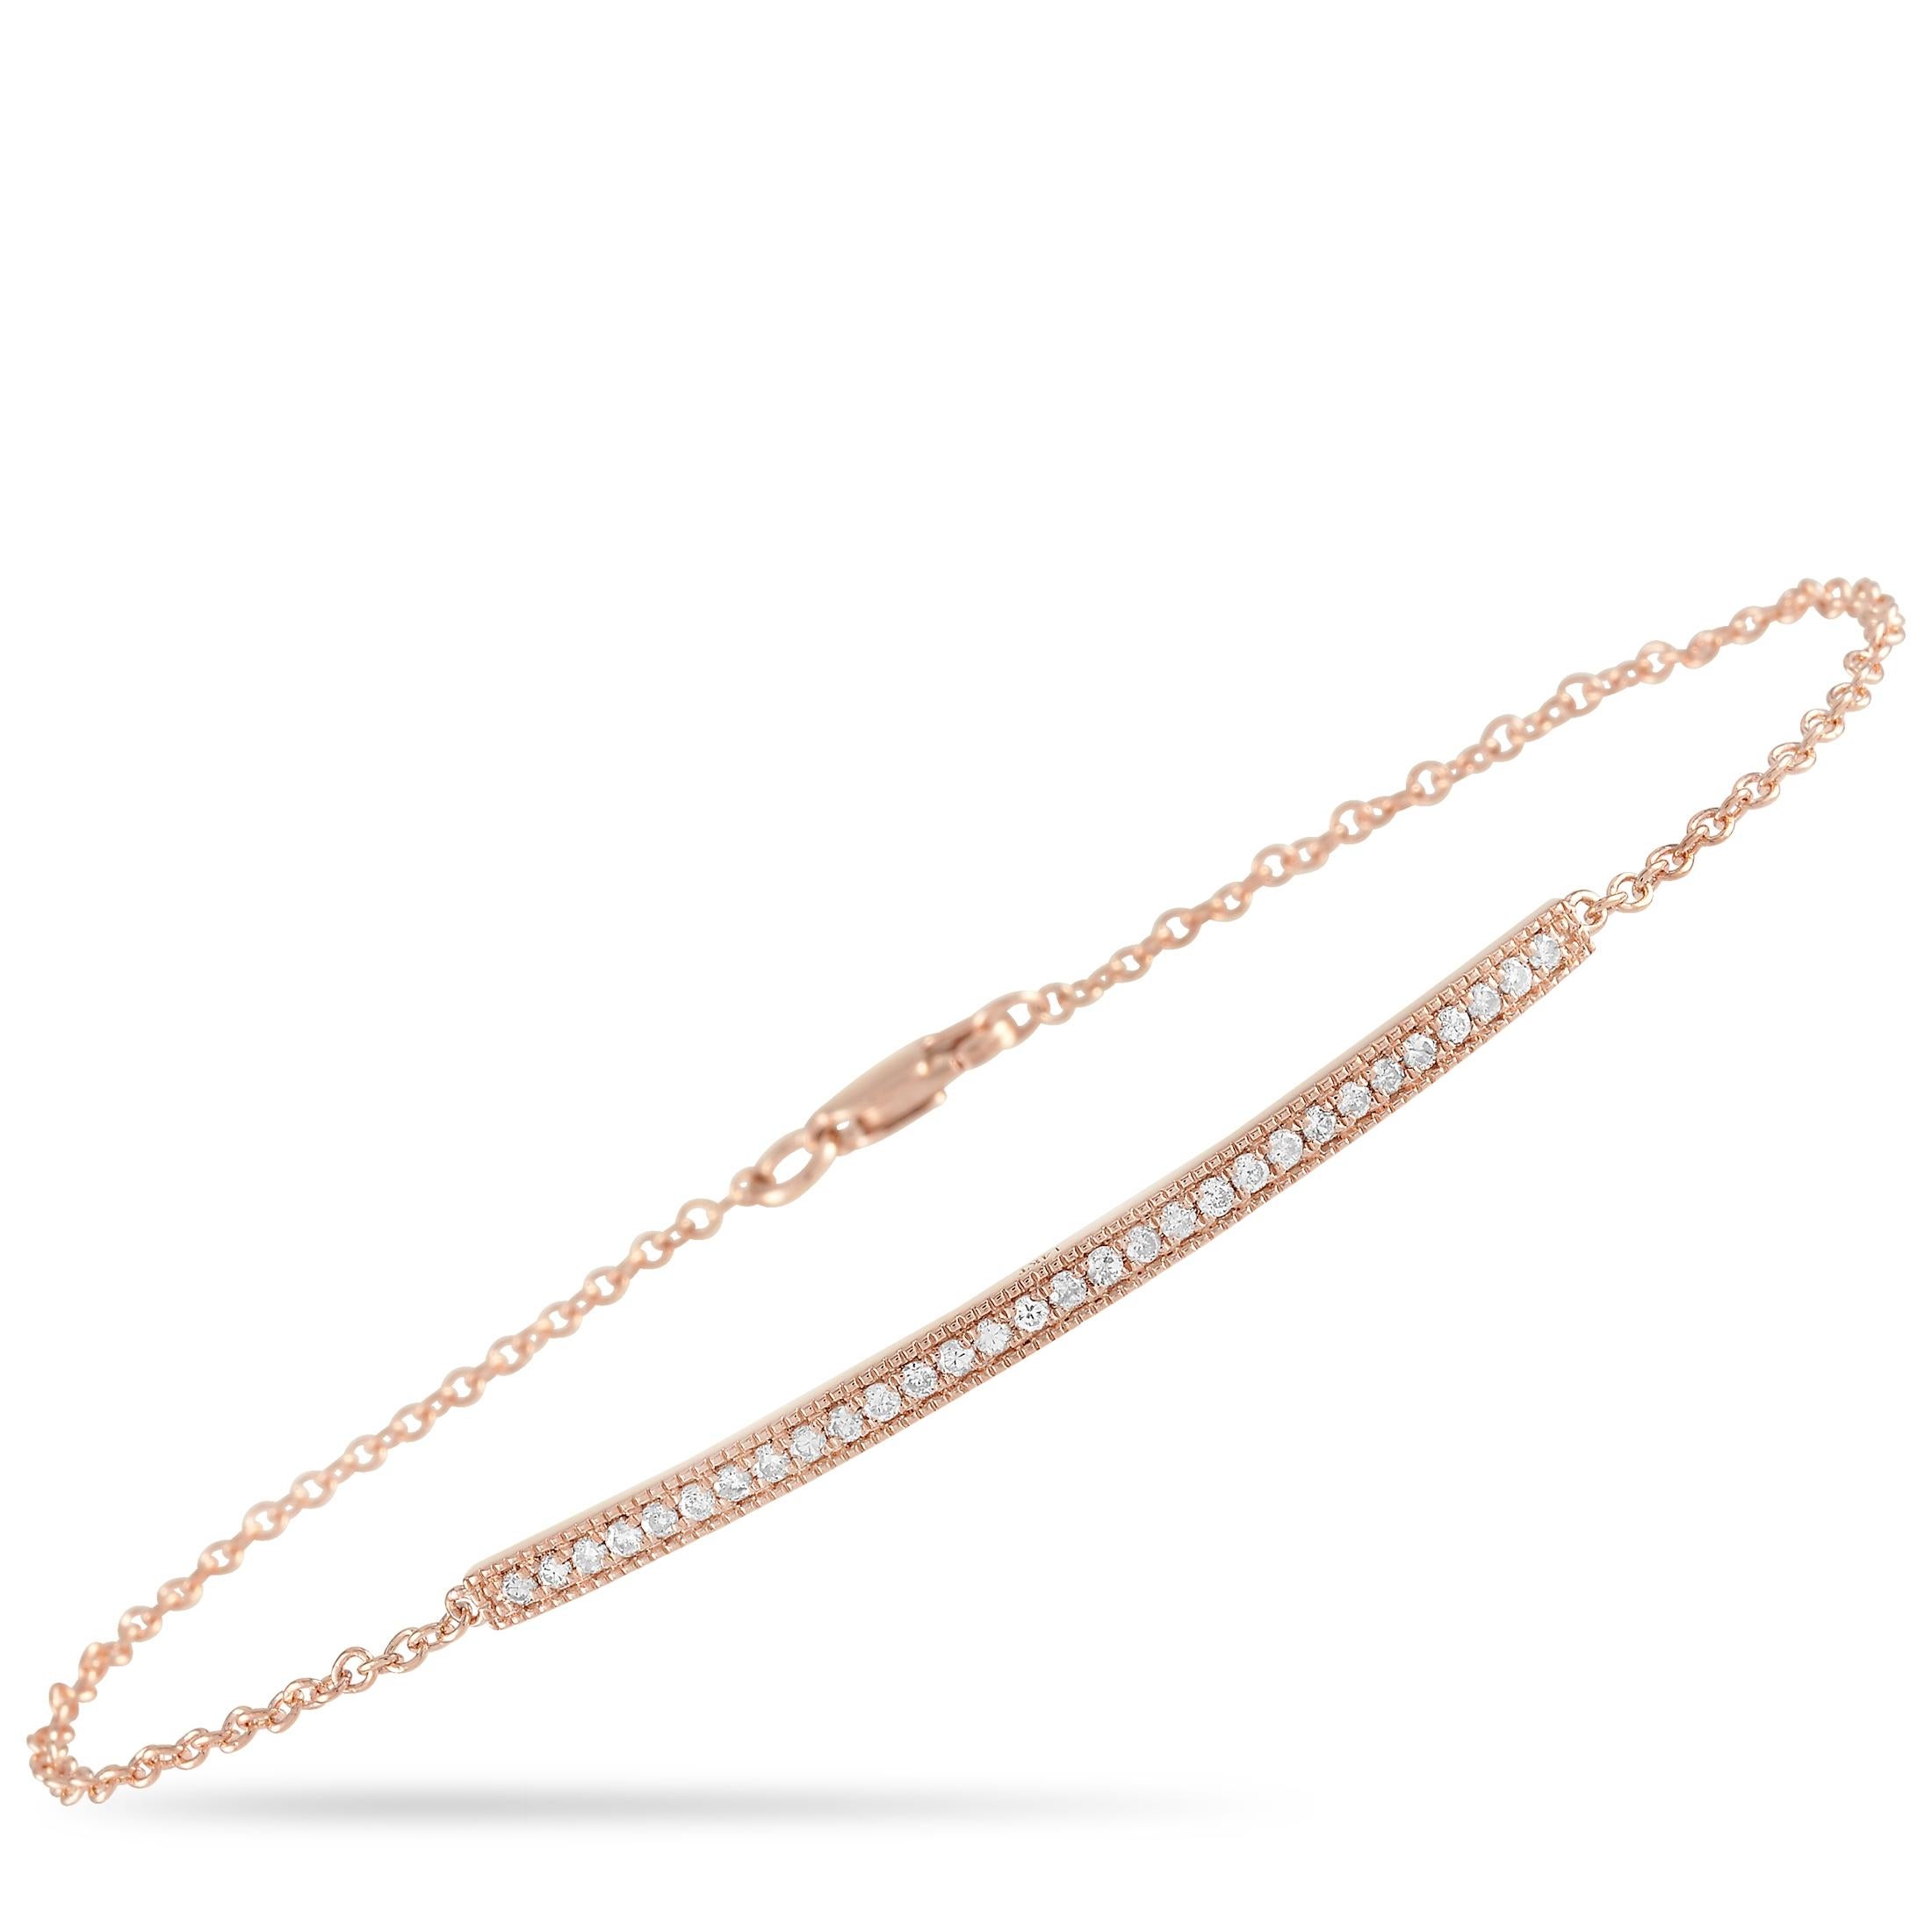 LB Exclusive 14 Karat Rose Gold 0.25 Carat Diamond Bracelet In New Condition For Sale In Southampton, PA